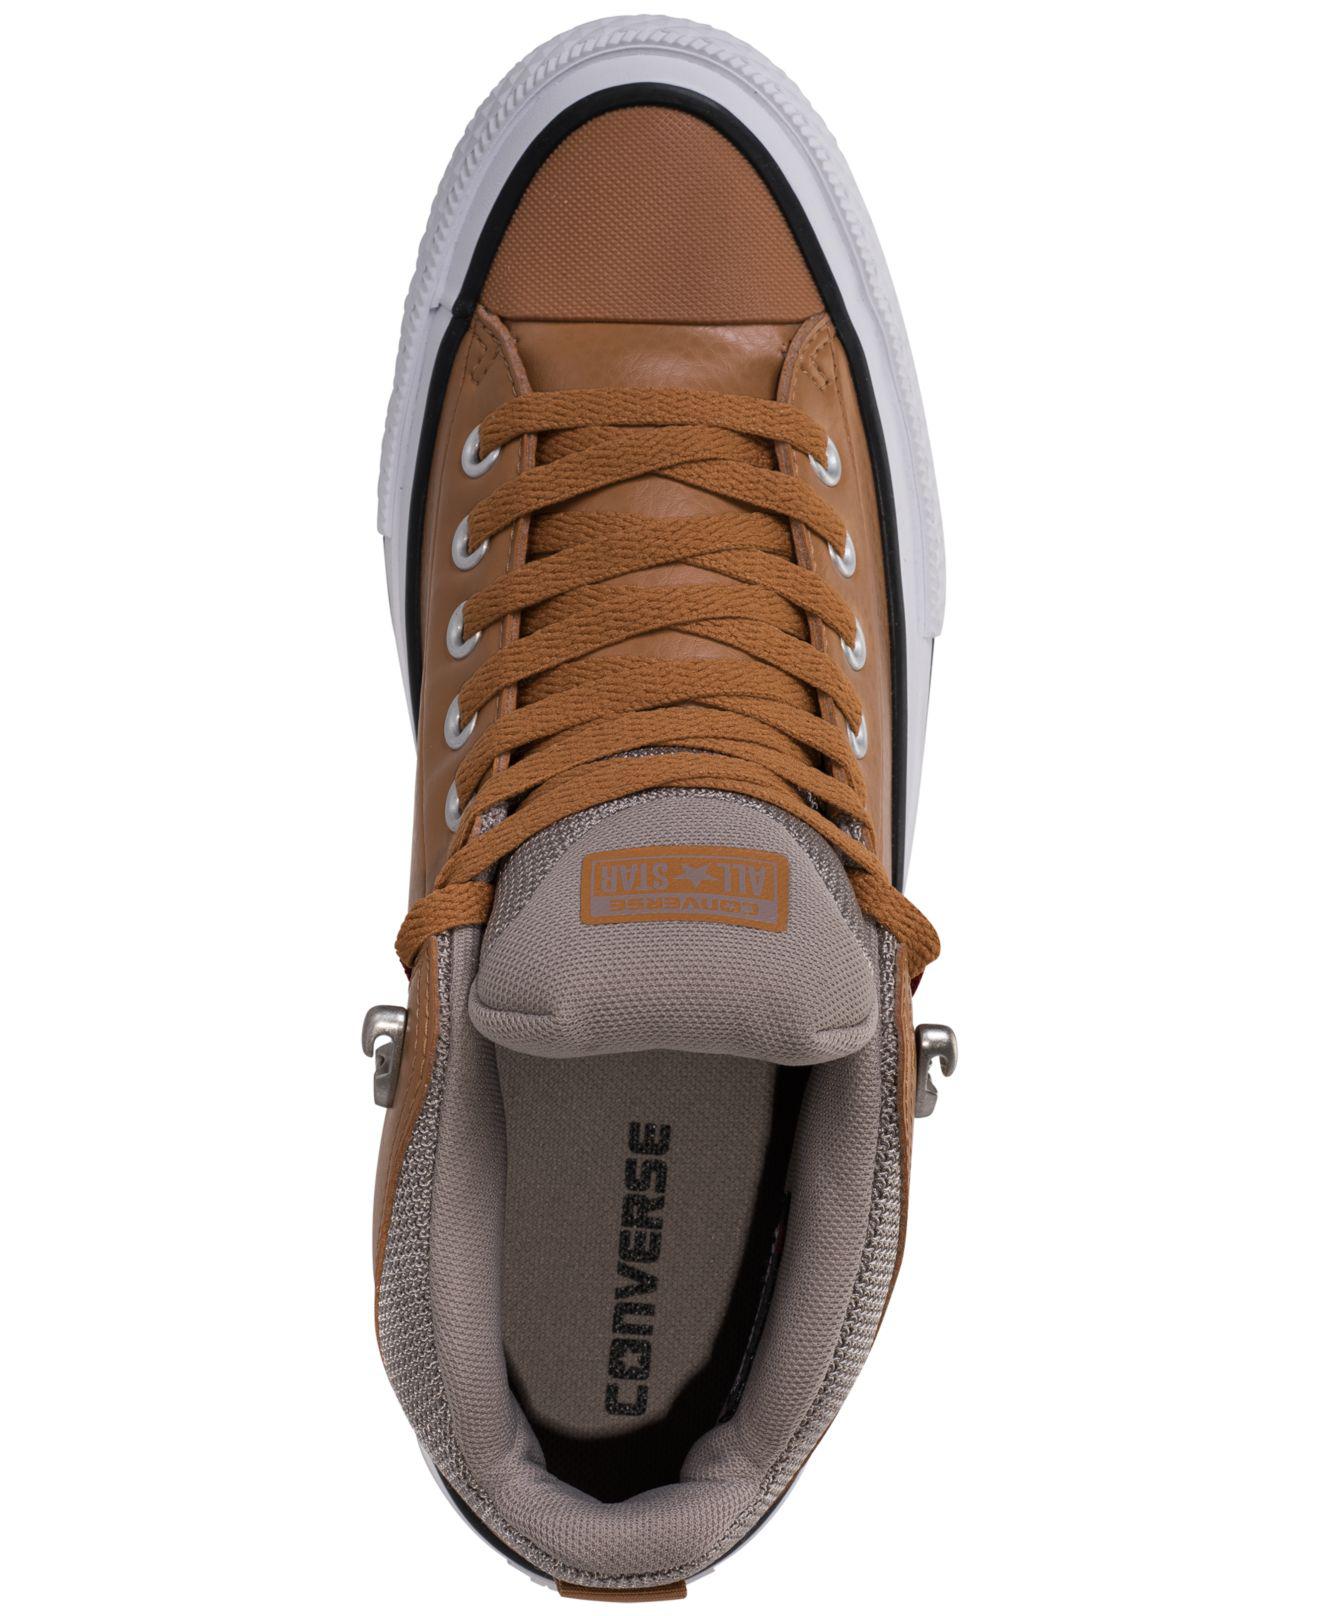 converse street mid leather brown